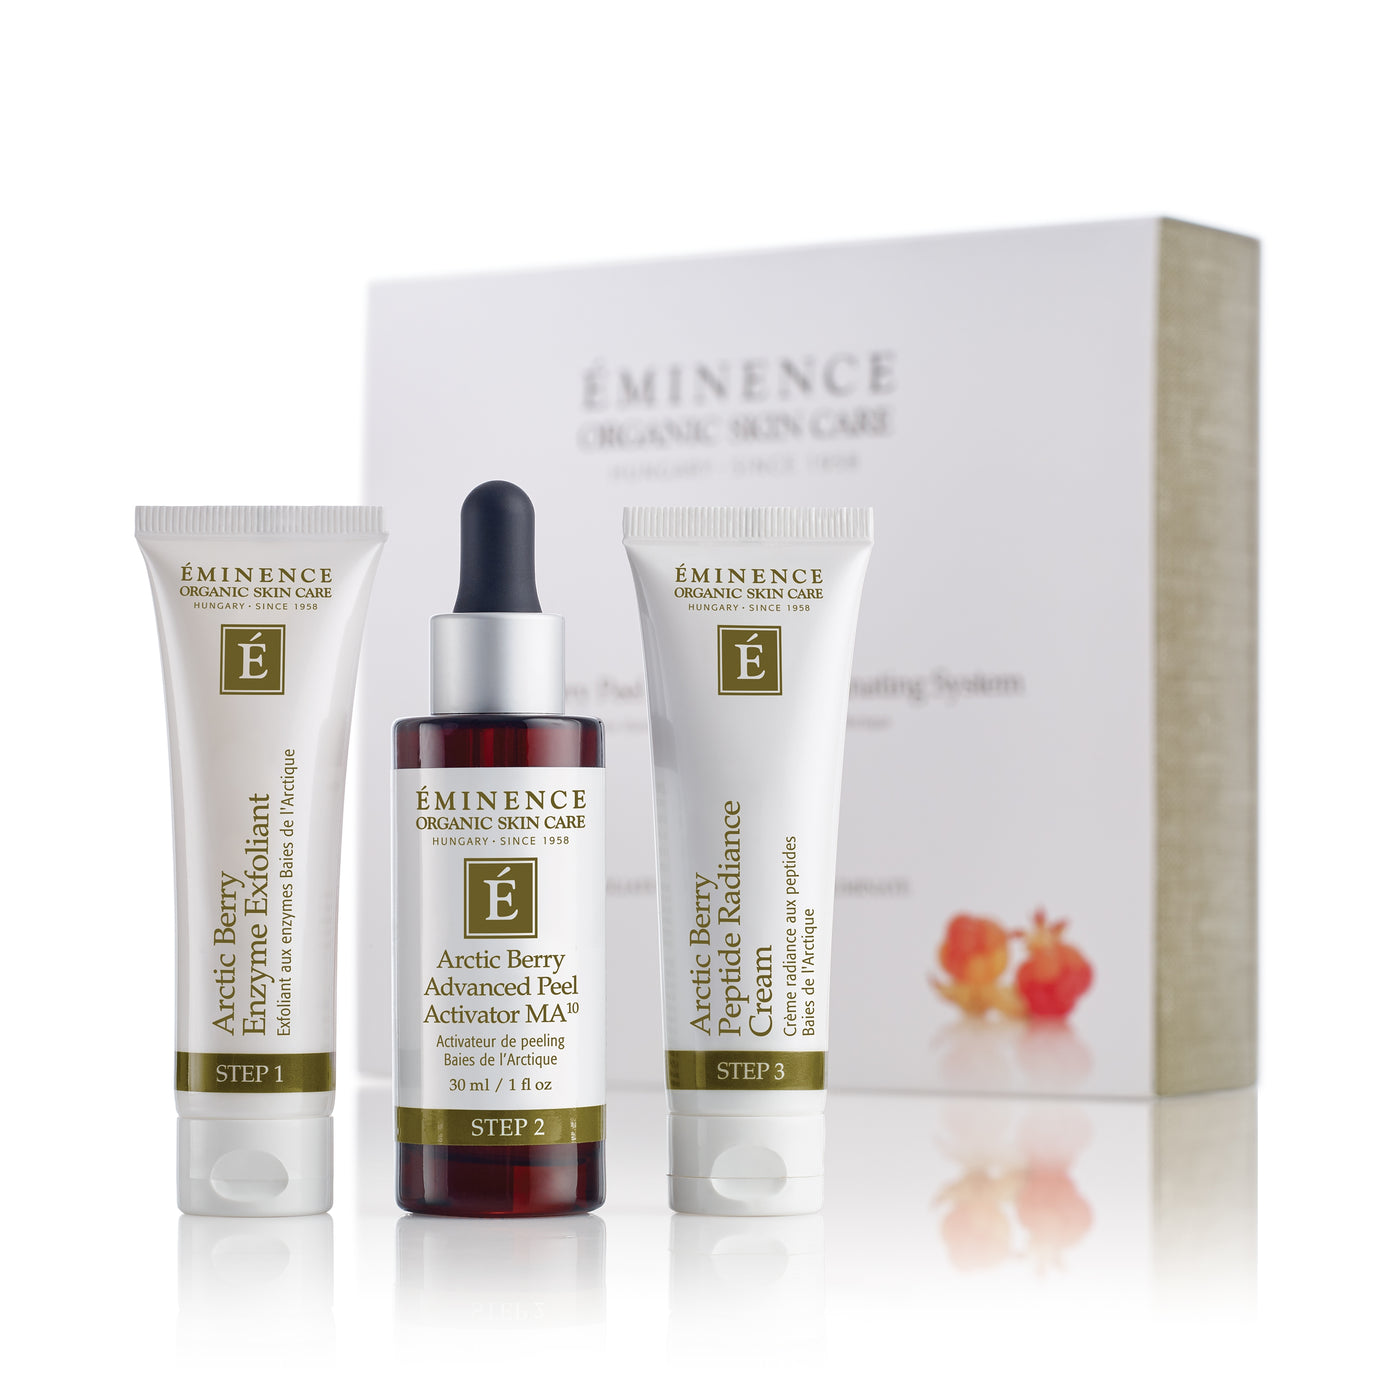 Eminence Organics Arctic Berry Peel & Peptide Illuminating System showing all three products and the box: Arctic Berry Enzyme Exfoliant, Arctic Berry Advanced Peel Activator, Arctic Berry Peptide Radiance Cream